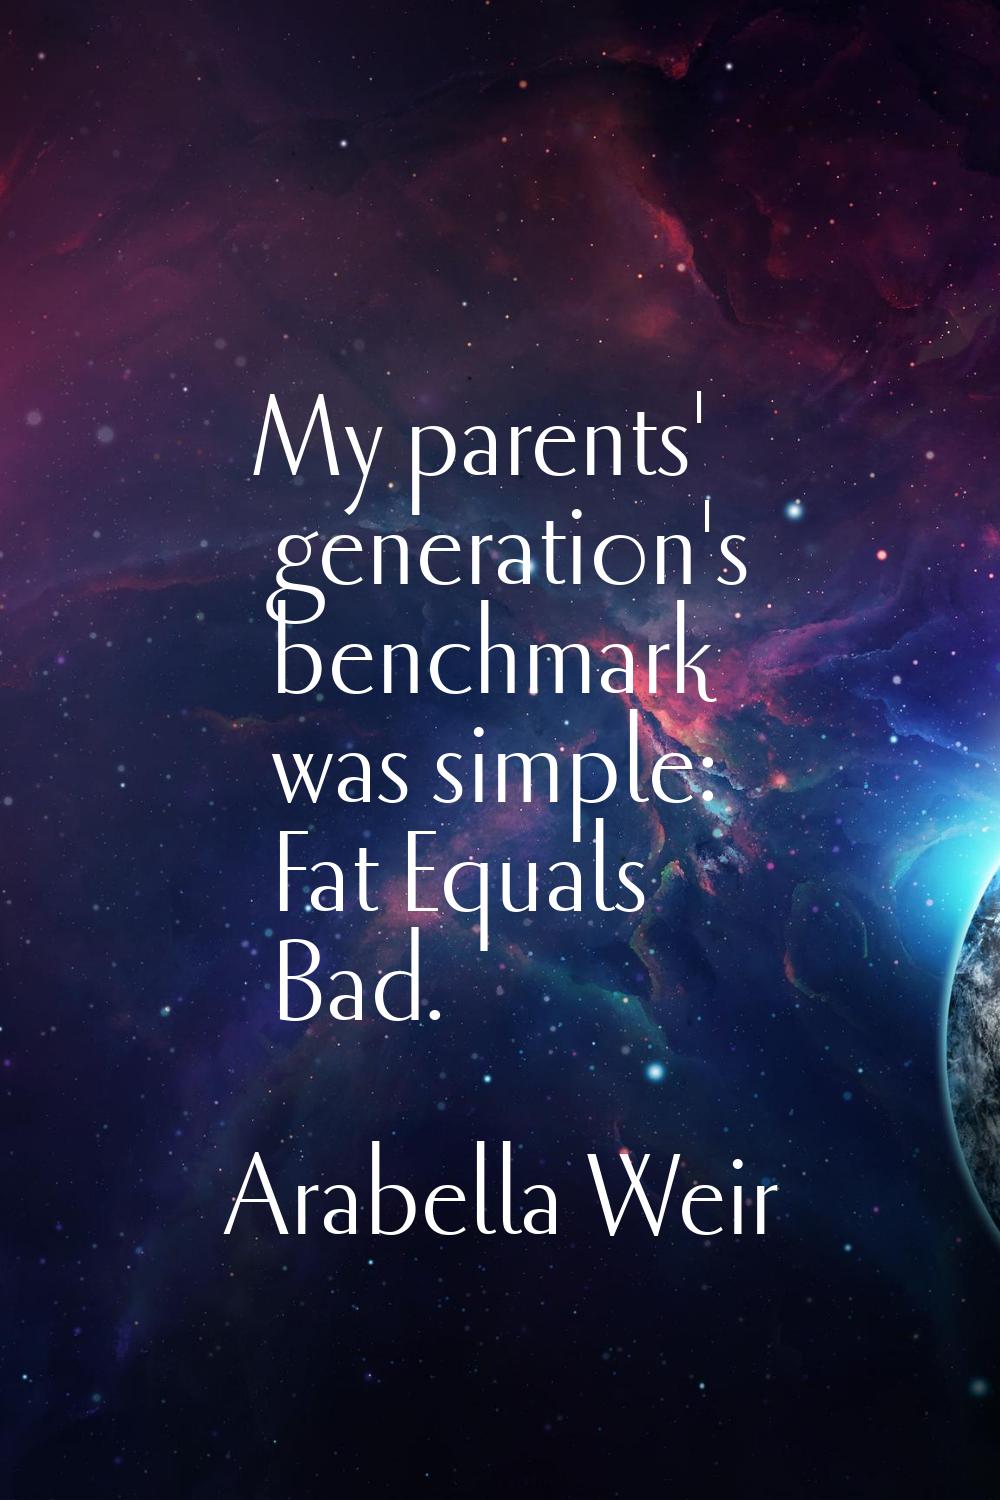 My parents' generation's benchmark was simple: Fat Equals Bad.